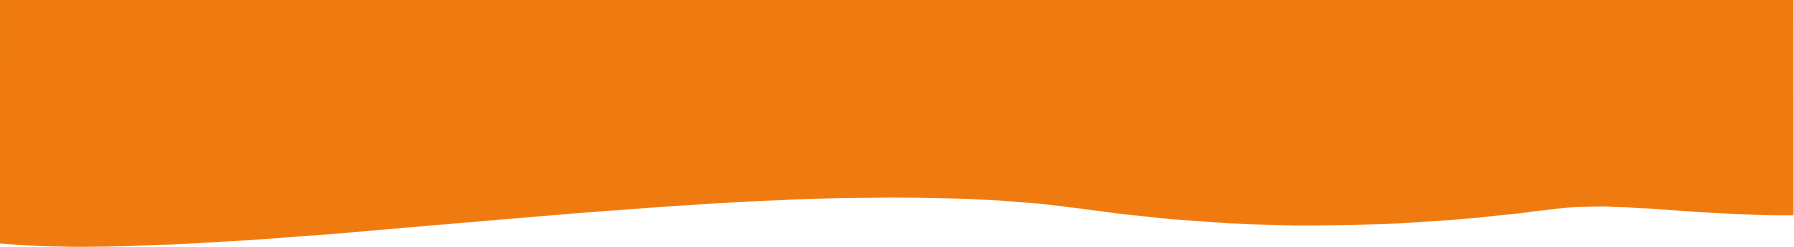 A piece of orange paper with a white border on a white background.